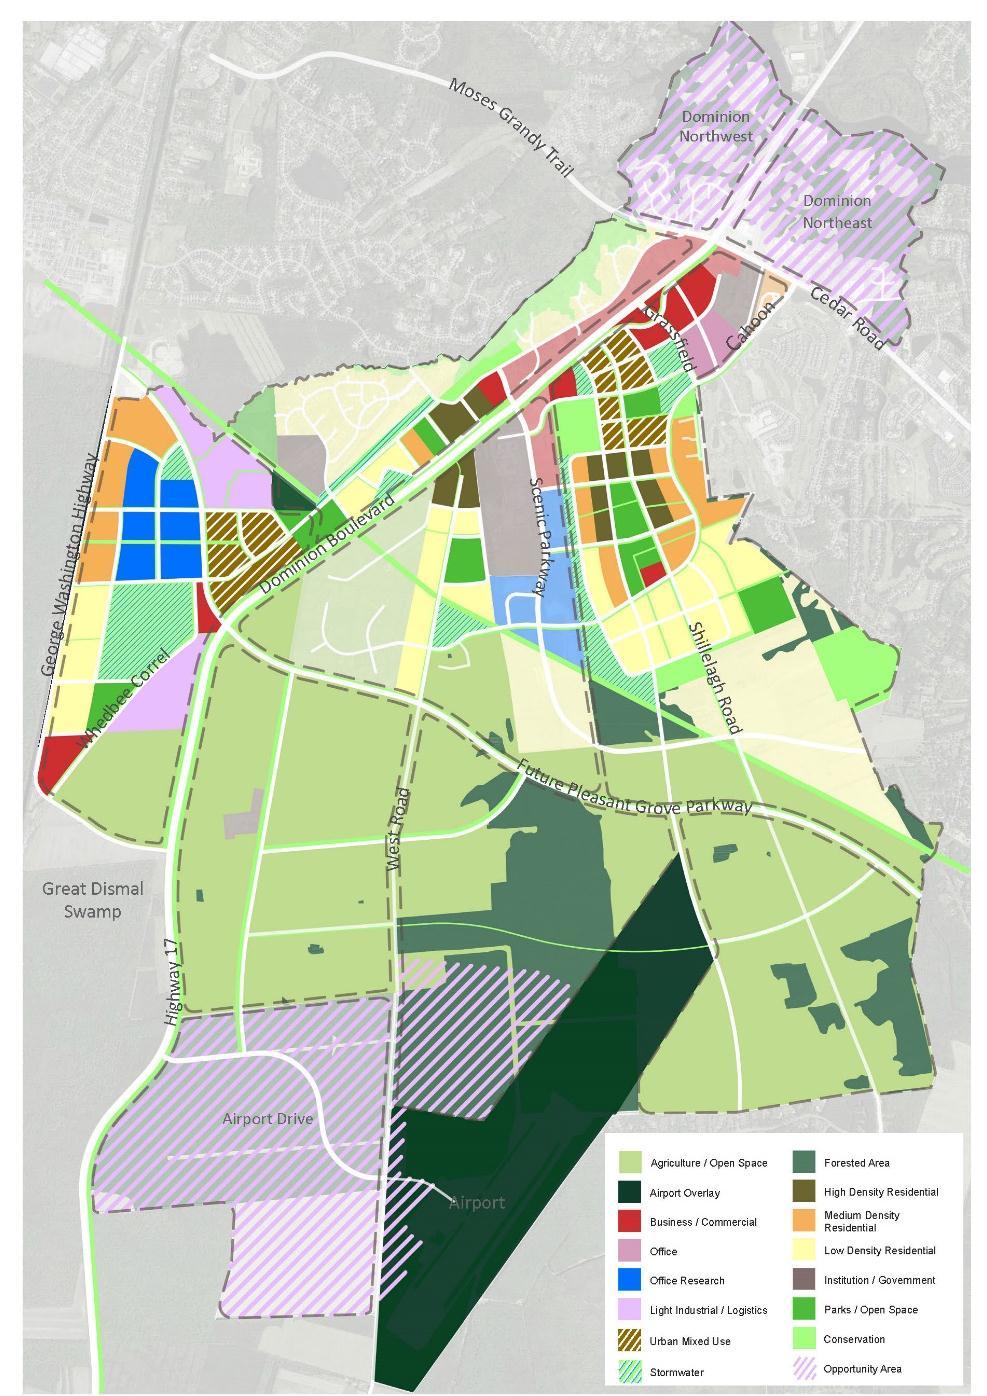 Dominion Boulevard Master Plan Walkable Mixed Use Neighborhoods and Districts connected by complete streets and greenways in the Northern portions Rural and Agricultural Preservation in the Southern